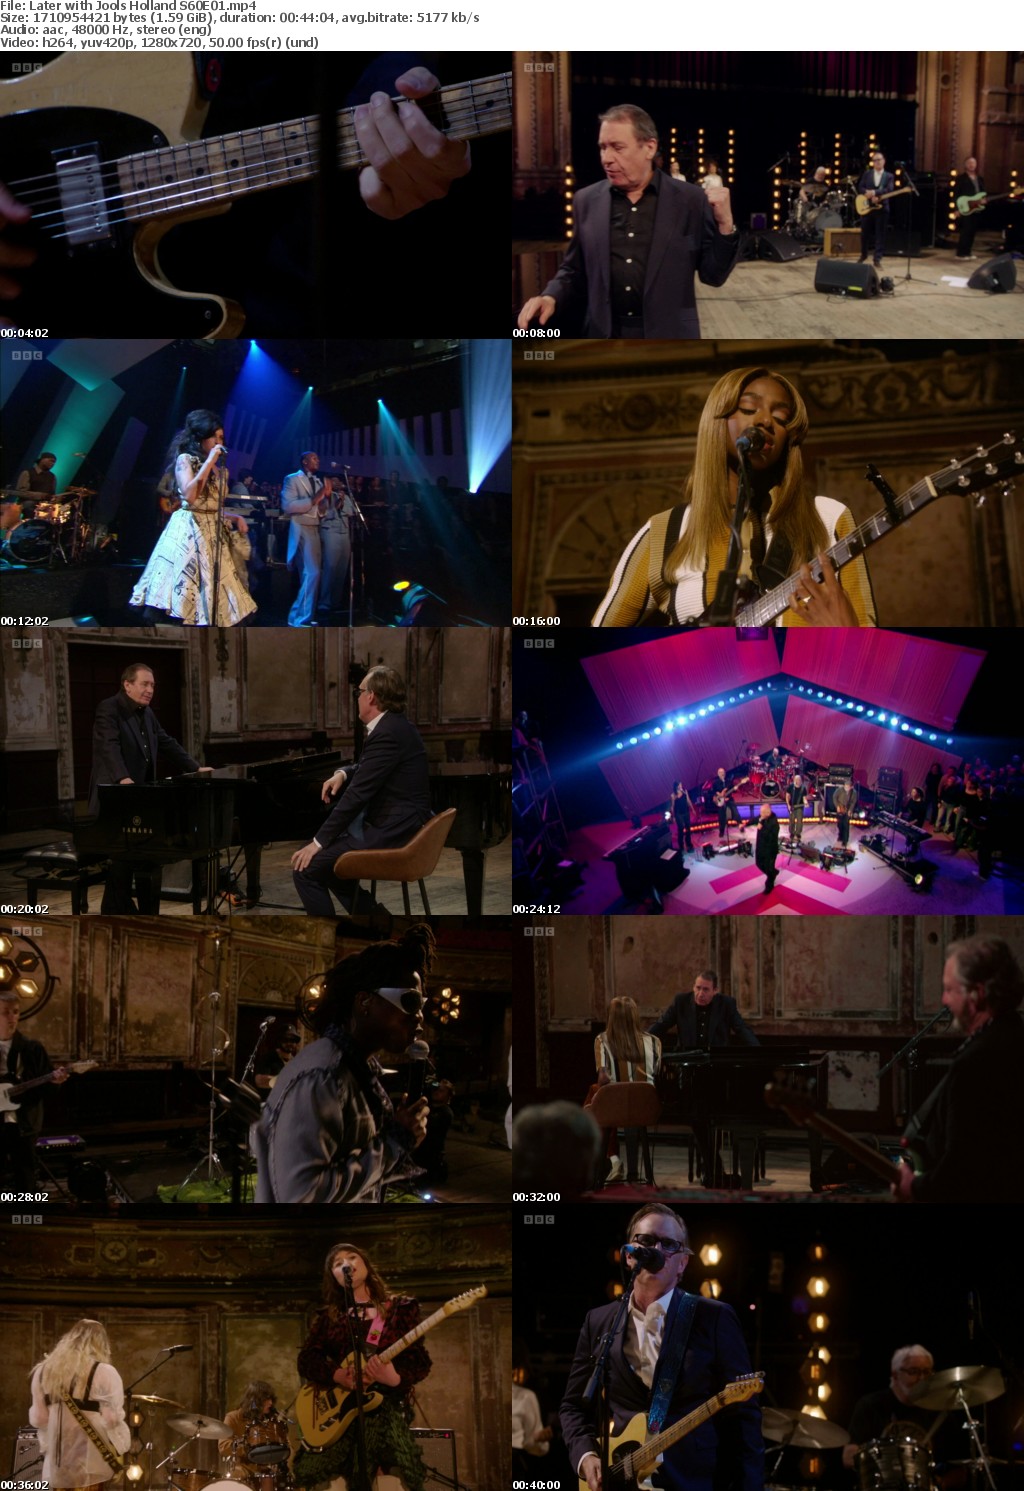 Later with Jools Holland (1280x720p HD, 50fps, soft Eng subs)